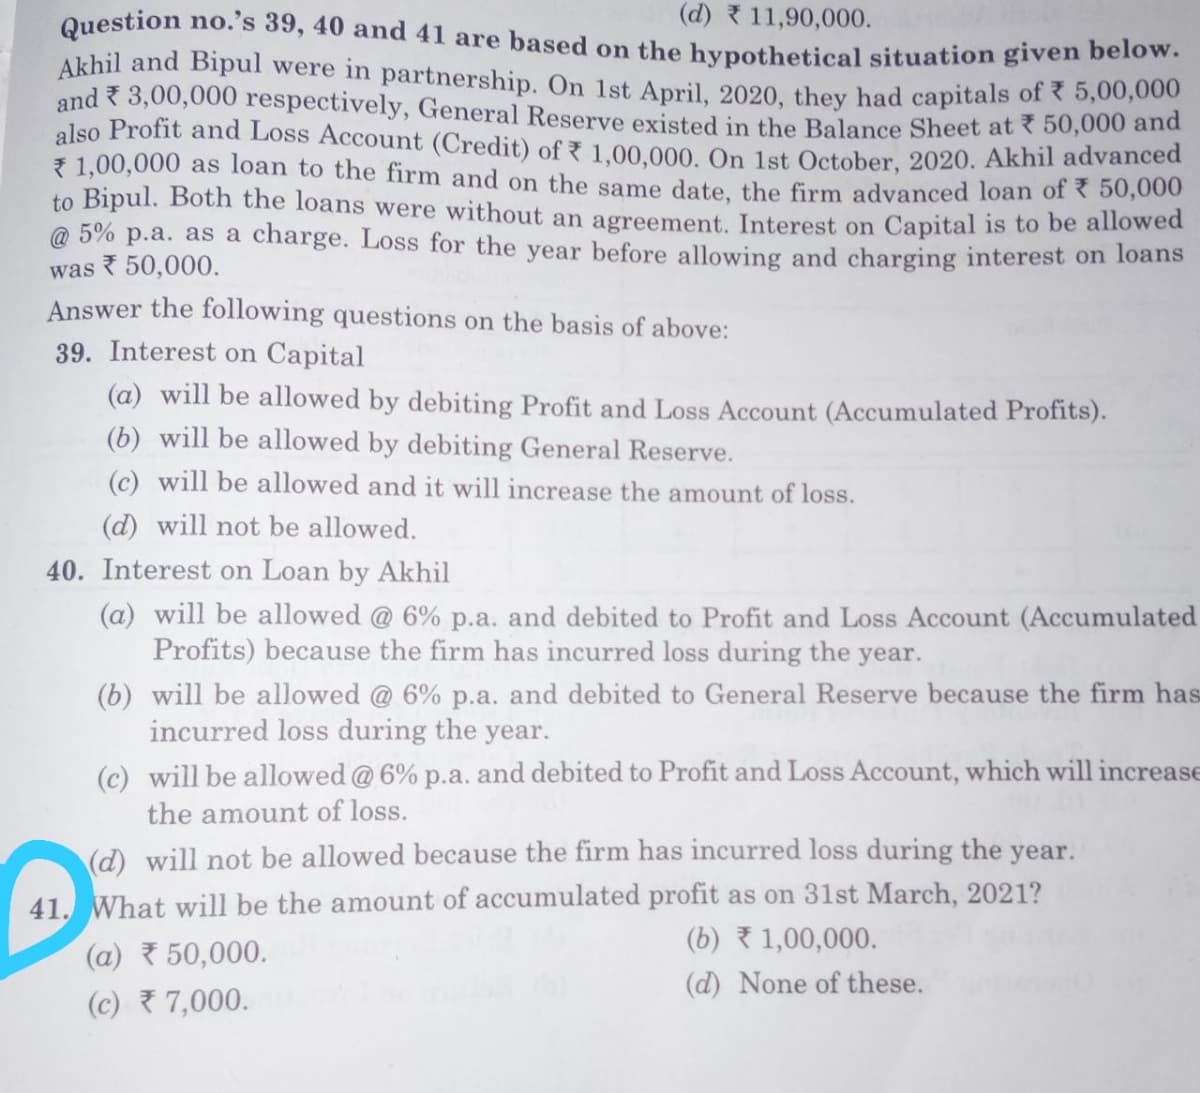 (d) 11,90,000.
Question no. s 39, 40 and 41 are based on the hypothetical situation given belovw.
Akhil and Bipul were in partnership. On 1st April, 2020, they had capitals of 5,00,0
and 3,00,000 respectively, General Reserve existed in the Balance Sheet at ? 50,0000 and
also Profit and Loss Account (Credit) of7 1.00.000, On 1st October, 2020. Akhil advanced
7 1,00,000 as loàn to the firm and on the same date, the firm advanced loan of < 50,000
to Bipul. Both the loans were without an agreement, Interest on Capital is to be allowed
@ 5% p.a. as a charge. Loss for the year before allowing and charging interest on loans
was 50,000.
Answer the following questions on the basis of above:
39. Interest on Capital
(a) will be allowed by debiting Profit and Loss Account (Accumulated Profits).
(b) will be allowed by debiting General Reserve.
(c) will be allowed and it will increase the amount of loss.
(d) will not be allowed.
40. Interest on Loan by Akhil
(a) will be allowed @ 6% p.a. and debited to Profit and Loss Account (Accumulated
Profits) because the firm has incurred loss during the year.
(b) will be allowed @ 6% p.a. and debited to General Reserve because the firm has
incurred loss during the year.
(c) will be allowed @ 6% p.a. and debited to Profit and Loss Account, which will increase
the amount of loss.
(d) will not be allowed because the firm has incurred loss during the year.
41. What will be the amount of accumulated profit as on 31st March, 2021?
(b) 1,00,000.
(a) 50,000.
(d) None of these.
(c) 7,000.
